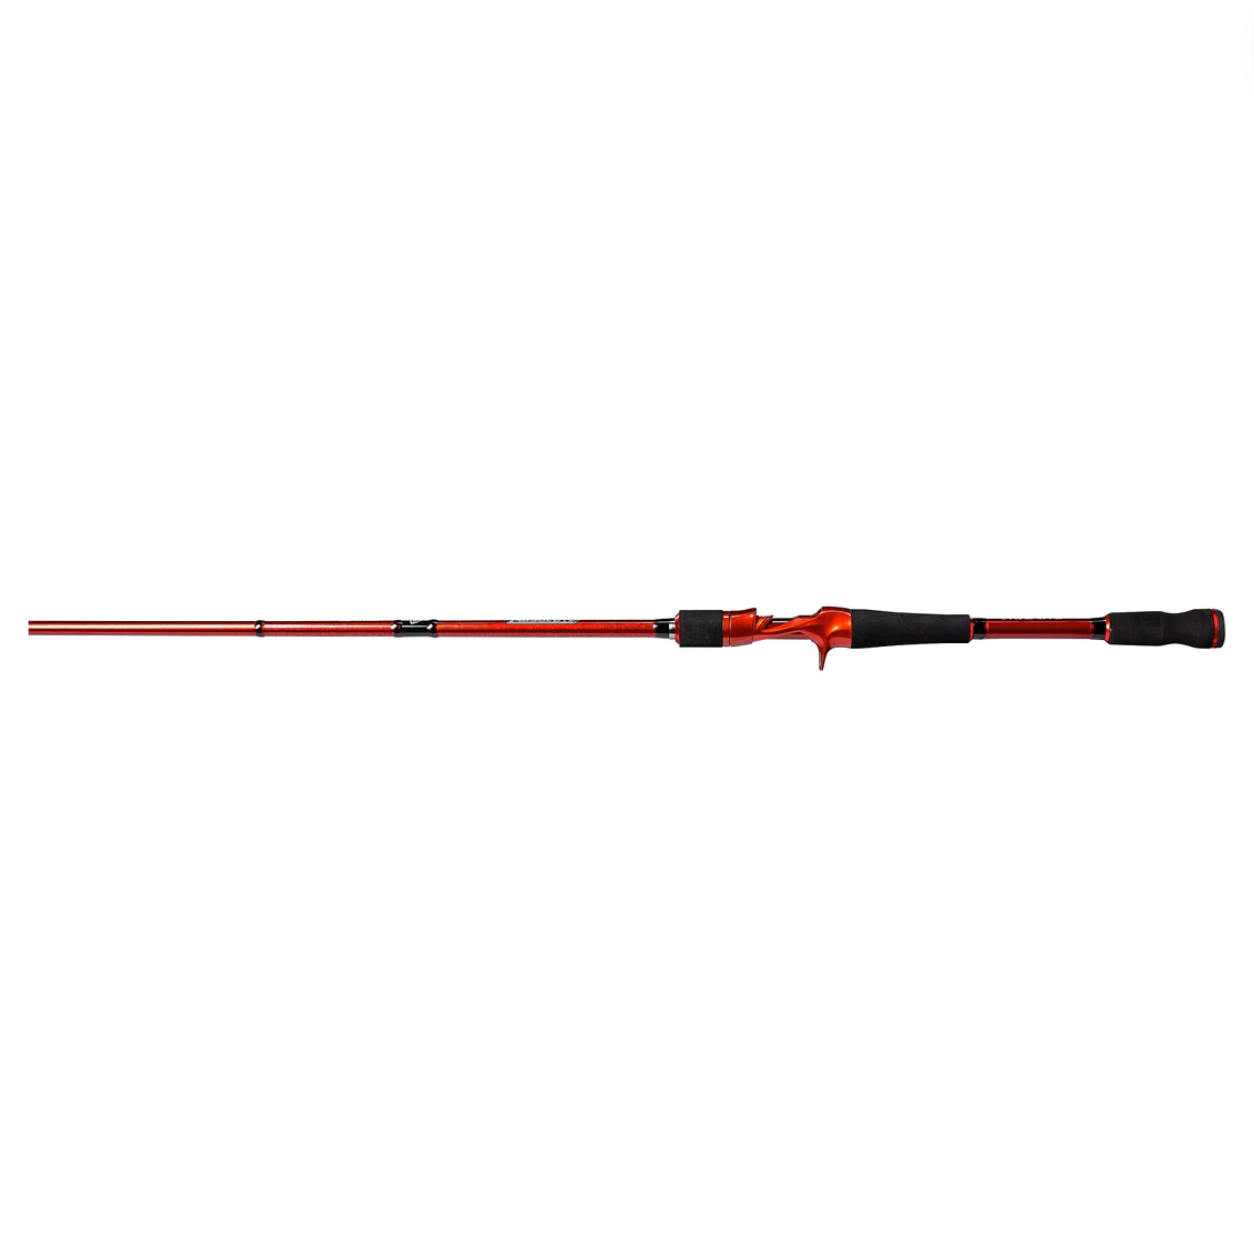 FAVORITE ABSOLUTE CASTING ROD 7'2"